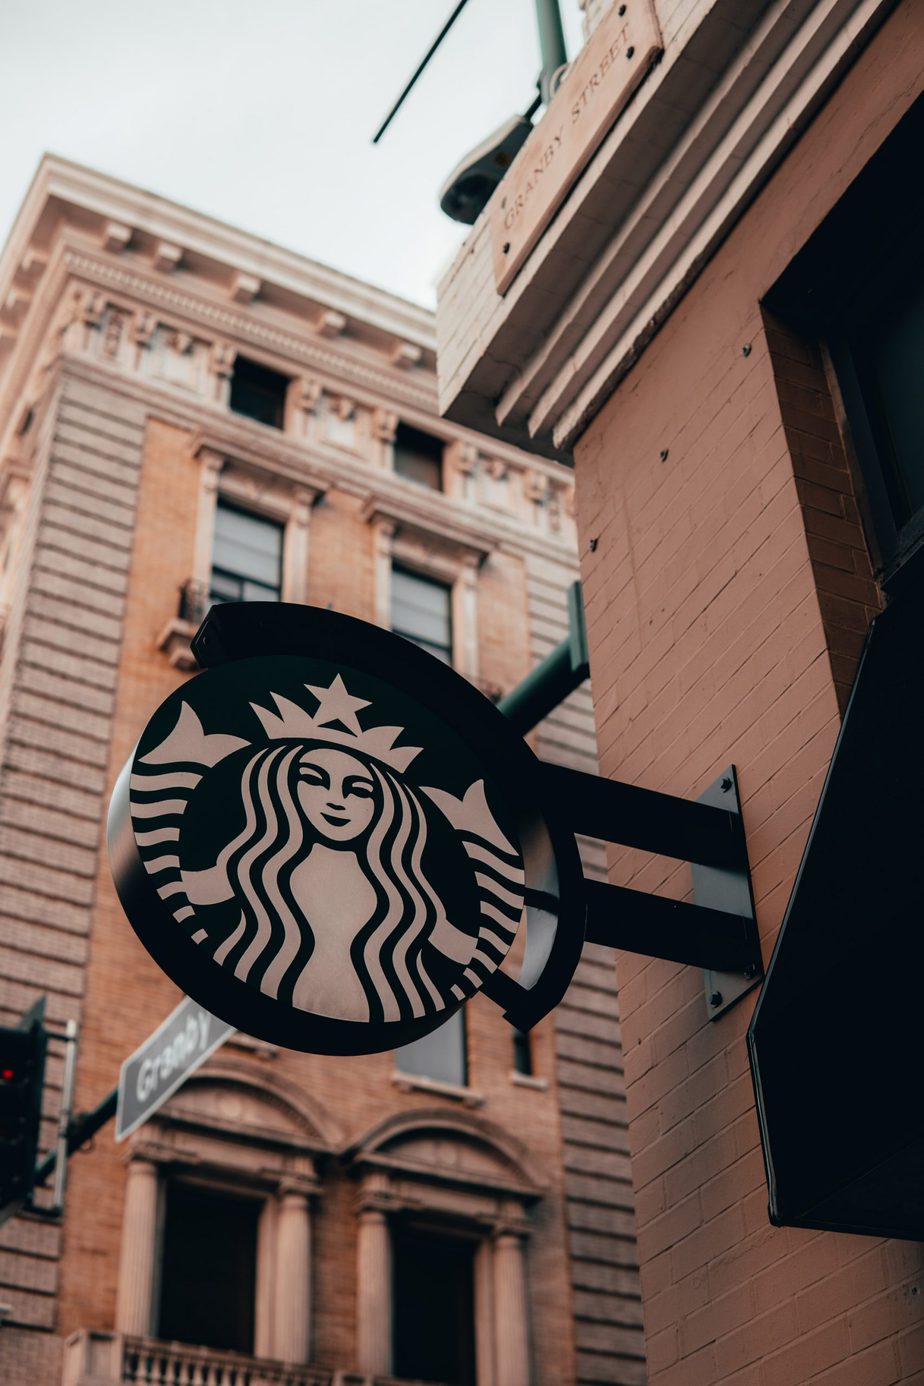 STARBUCKS EMPLOYEES PETITION TO CLOSE SHOPS